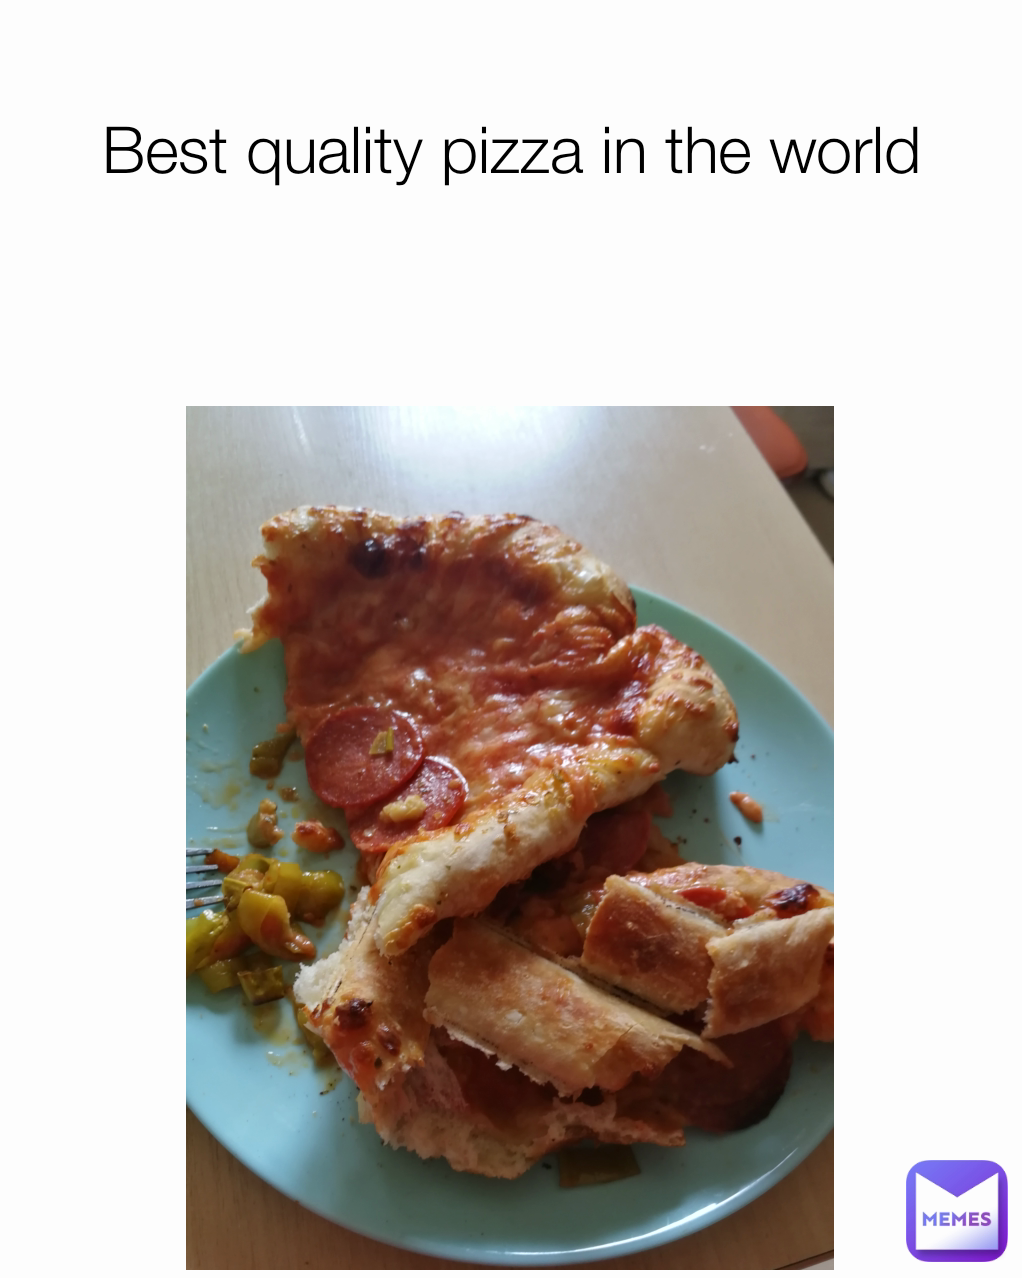 Best quality pizza in the world